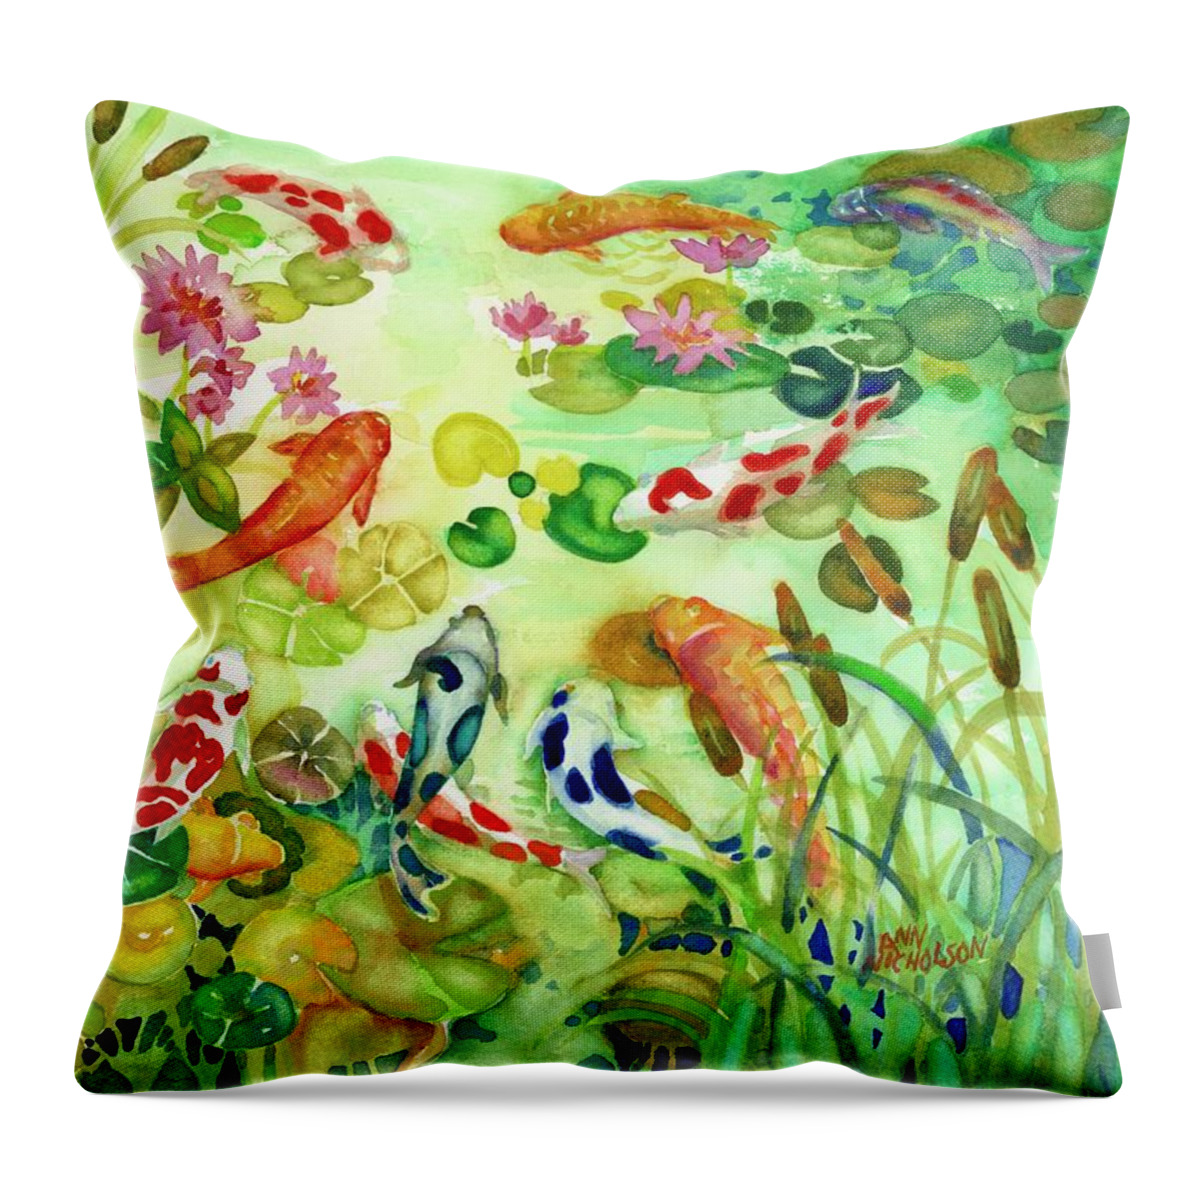 Pond Throw Pillow featuring the painting Koi Pond II by Ann Nicholson